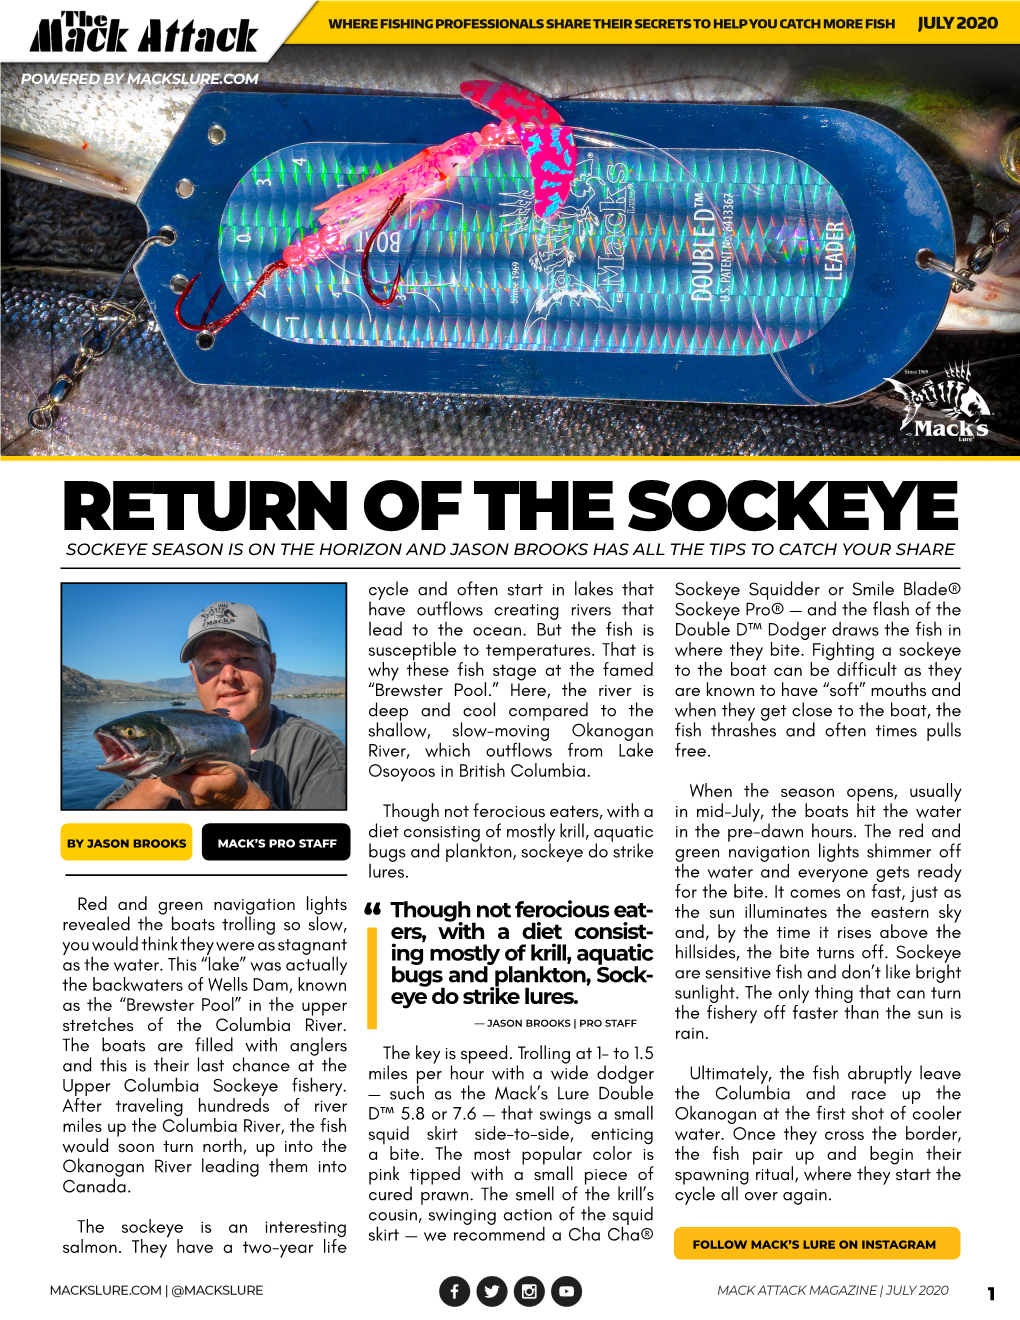 Return of the Sockeye Sockeye Season Is on the Horizon and Jason Brooks Has All the Tips to Catch Your Share